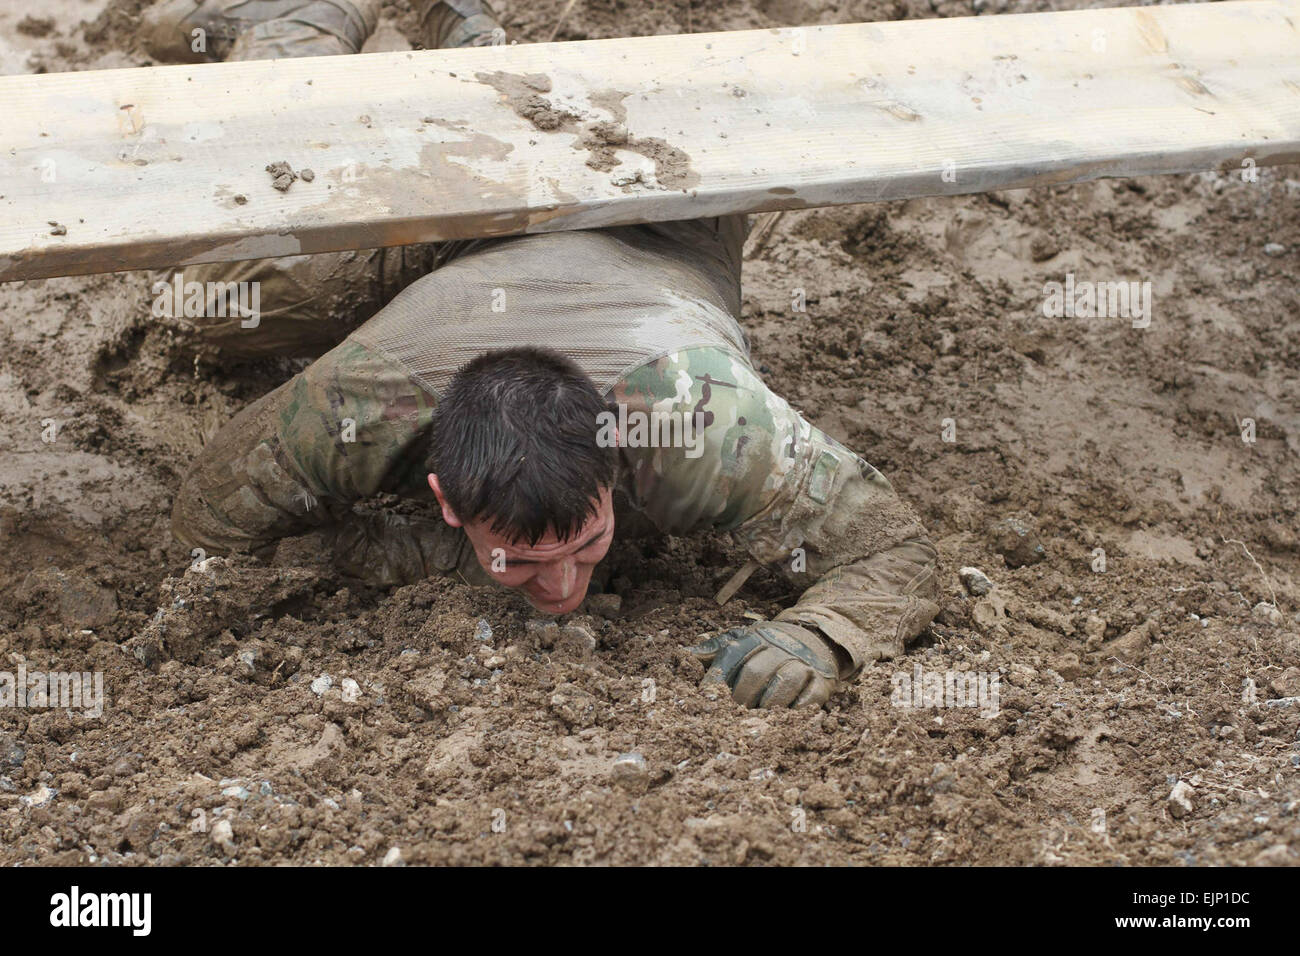 A Soldier manages the over-and-under obstacle while participating in the Forward Operating Base Salerno, Afghanistan, Mud Run, March 24, 2013. More than 50 soldiers from various units from the FOB participated in the course. The two-mile course featured 15 different obstacles that challenged the soldiers physically and mentally, while adding the elements of water and mud to help make the course even more difficult.  Sgt. 1st Class Abram Pinnington, TF 3/101 Public Affairs Stock Photo